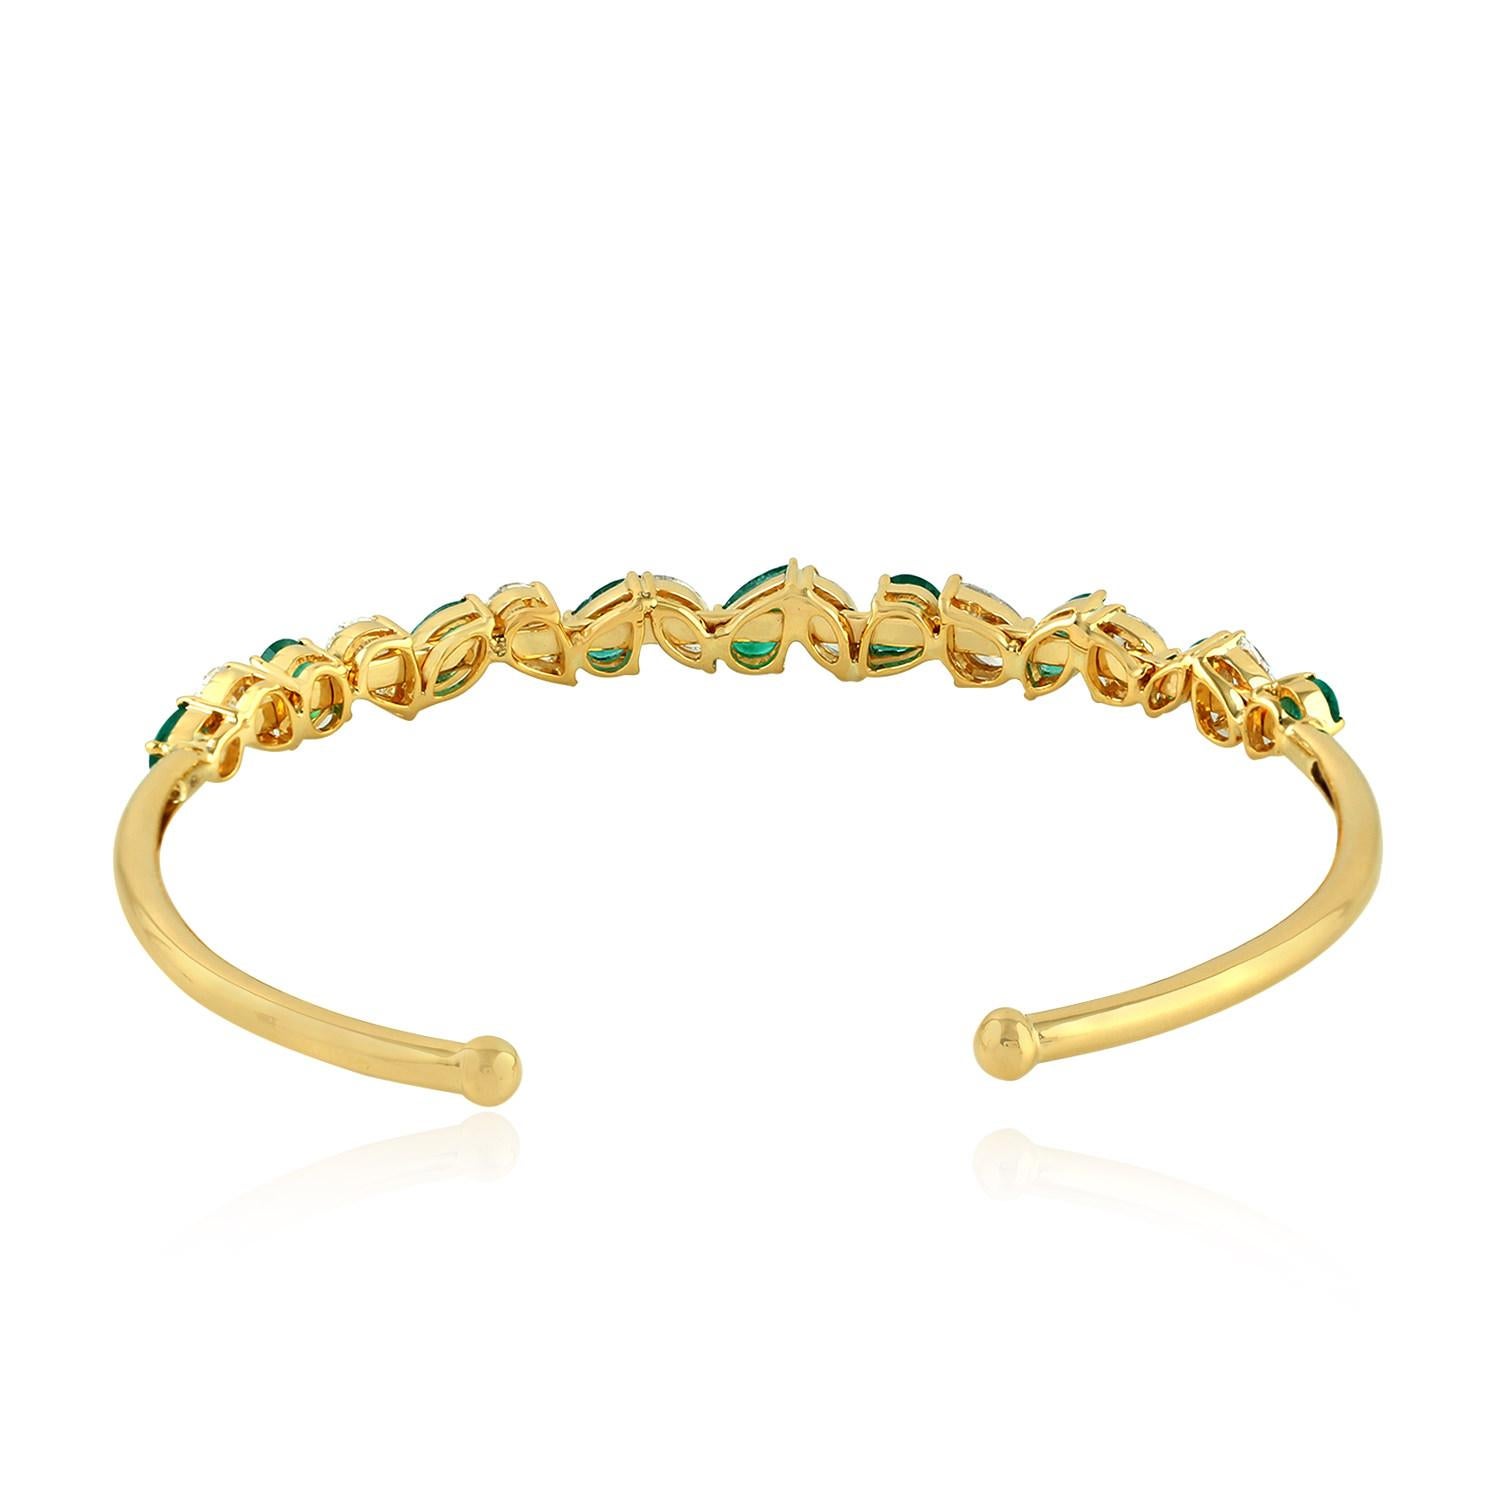 Art Nouveau Marquise Shaped Emerald & Diamond Bangle Made In 18k Gold For Sale